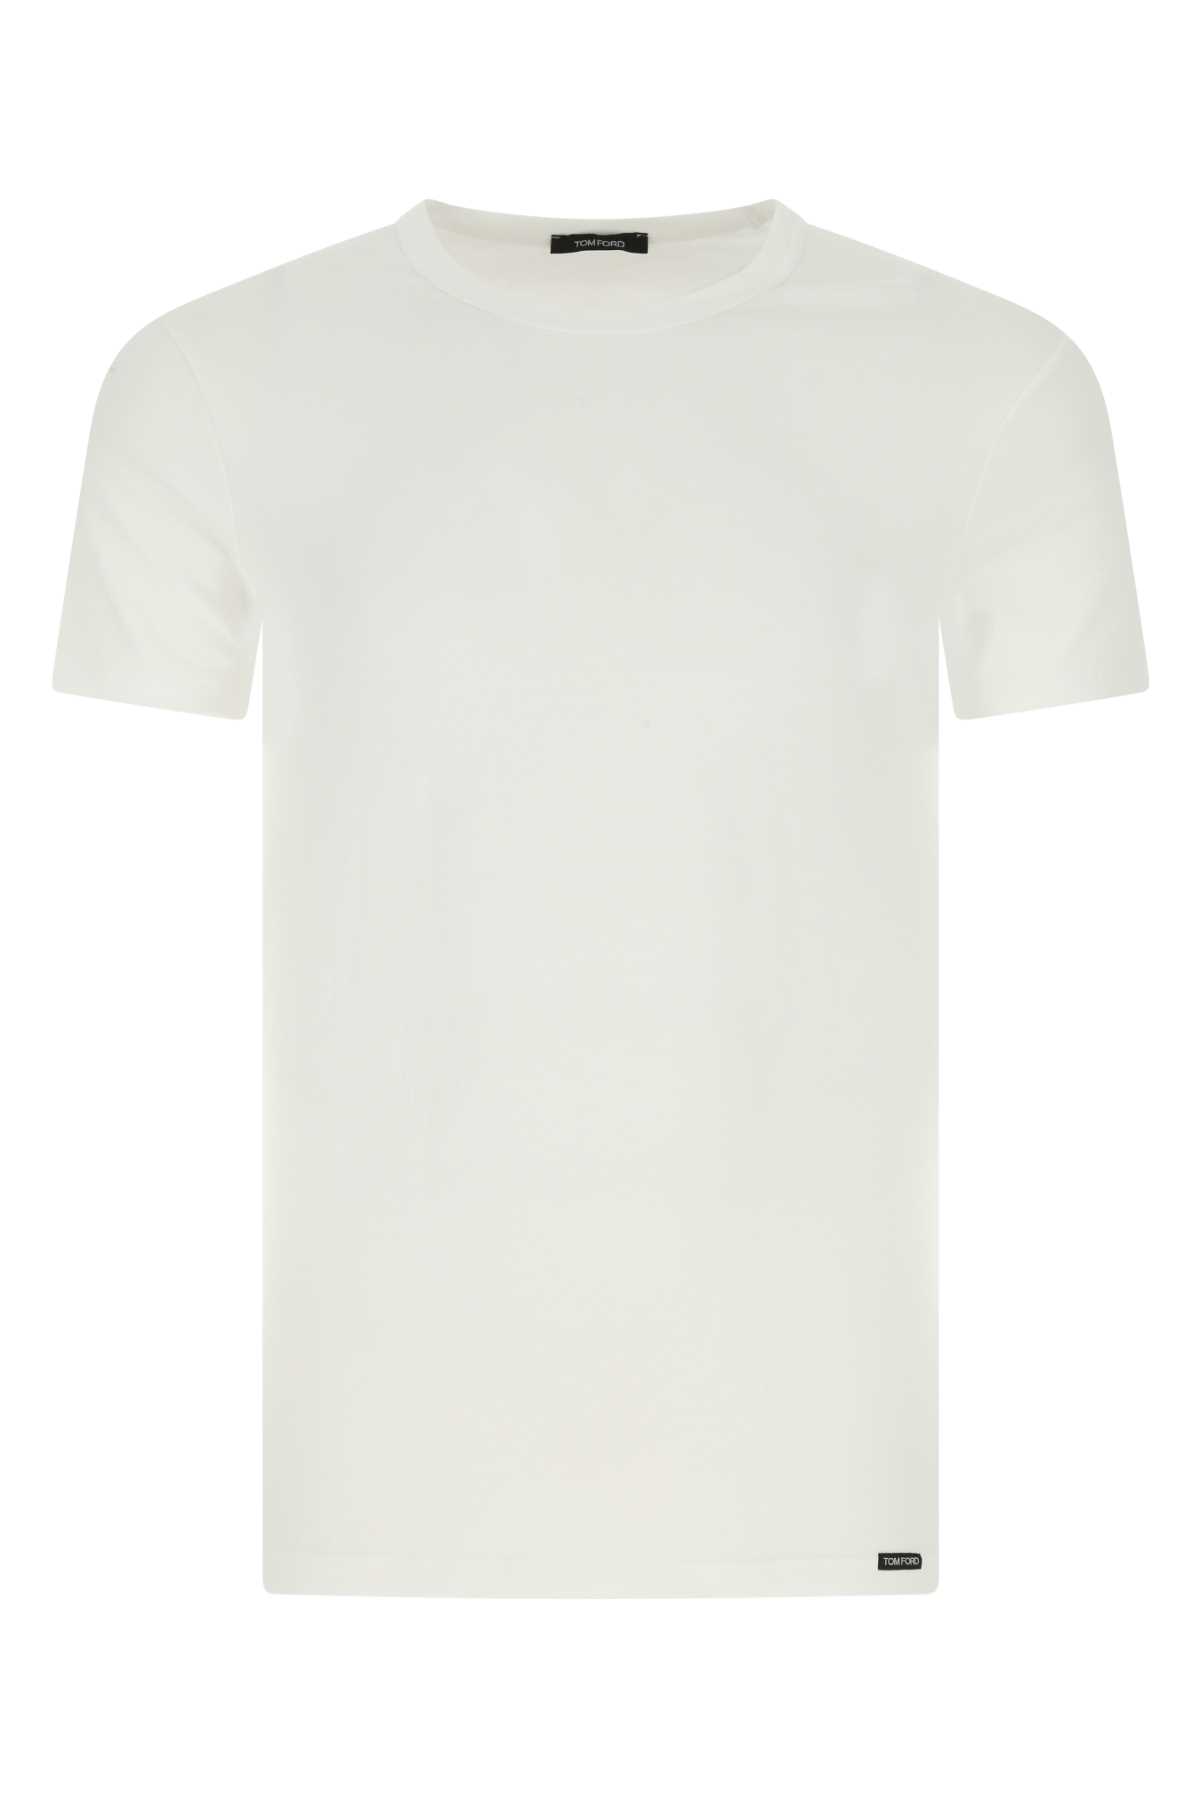 Tom Ford White Stretch Cotton T-shirt In Neutral